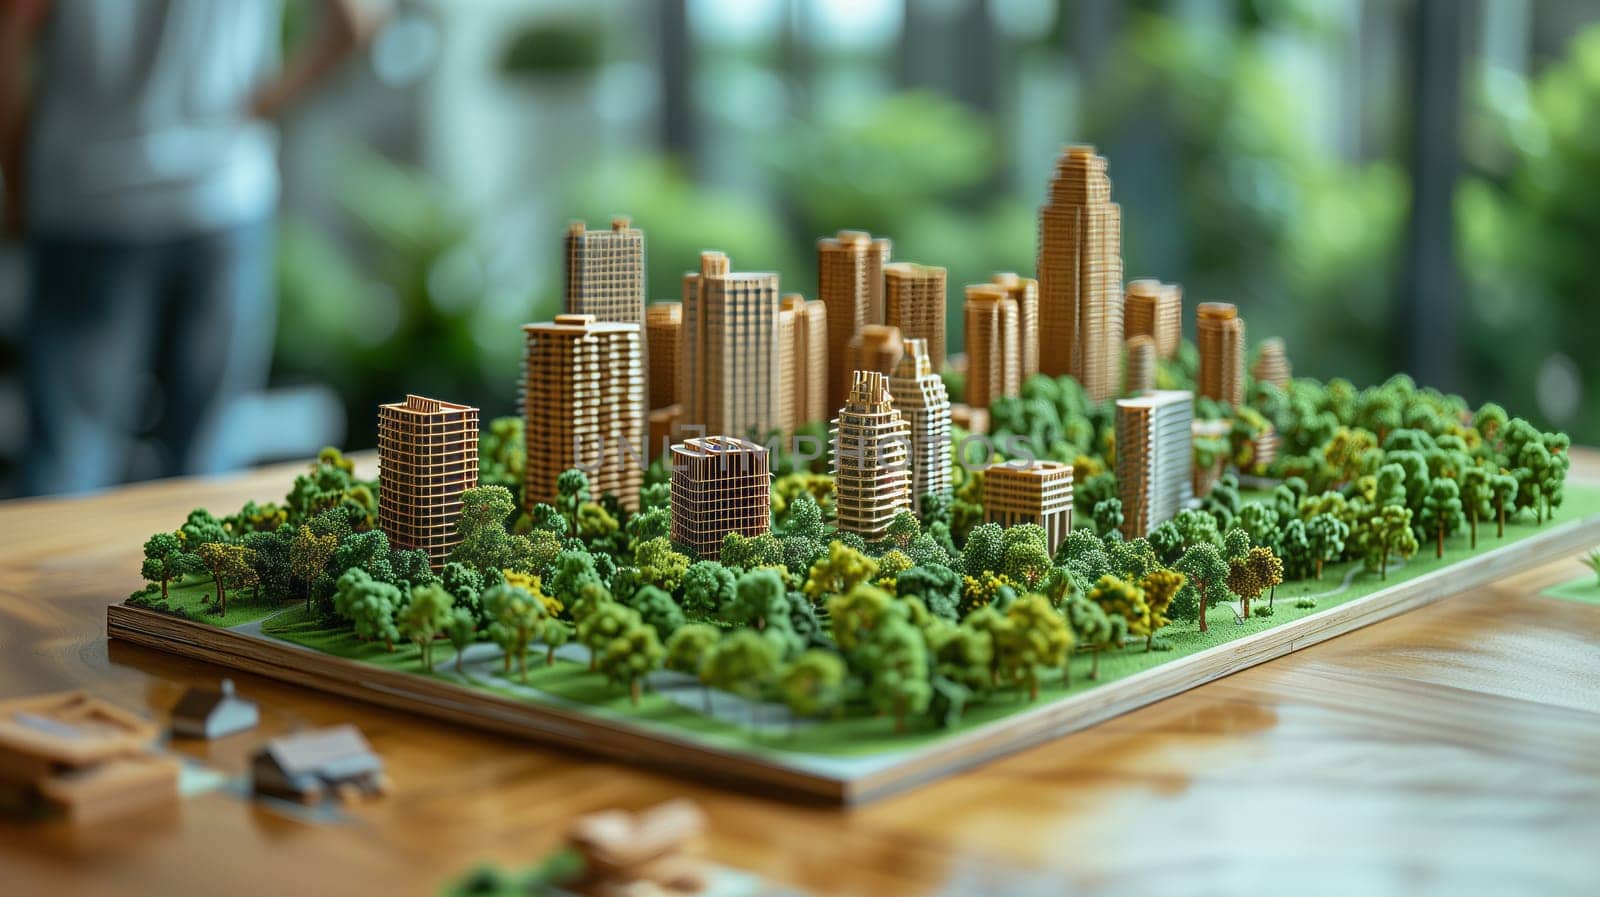 A wooden city model sits on a table surrounded by trees, showcasing a blend of urban design and natural landscape with skyscrapers and houses